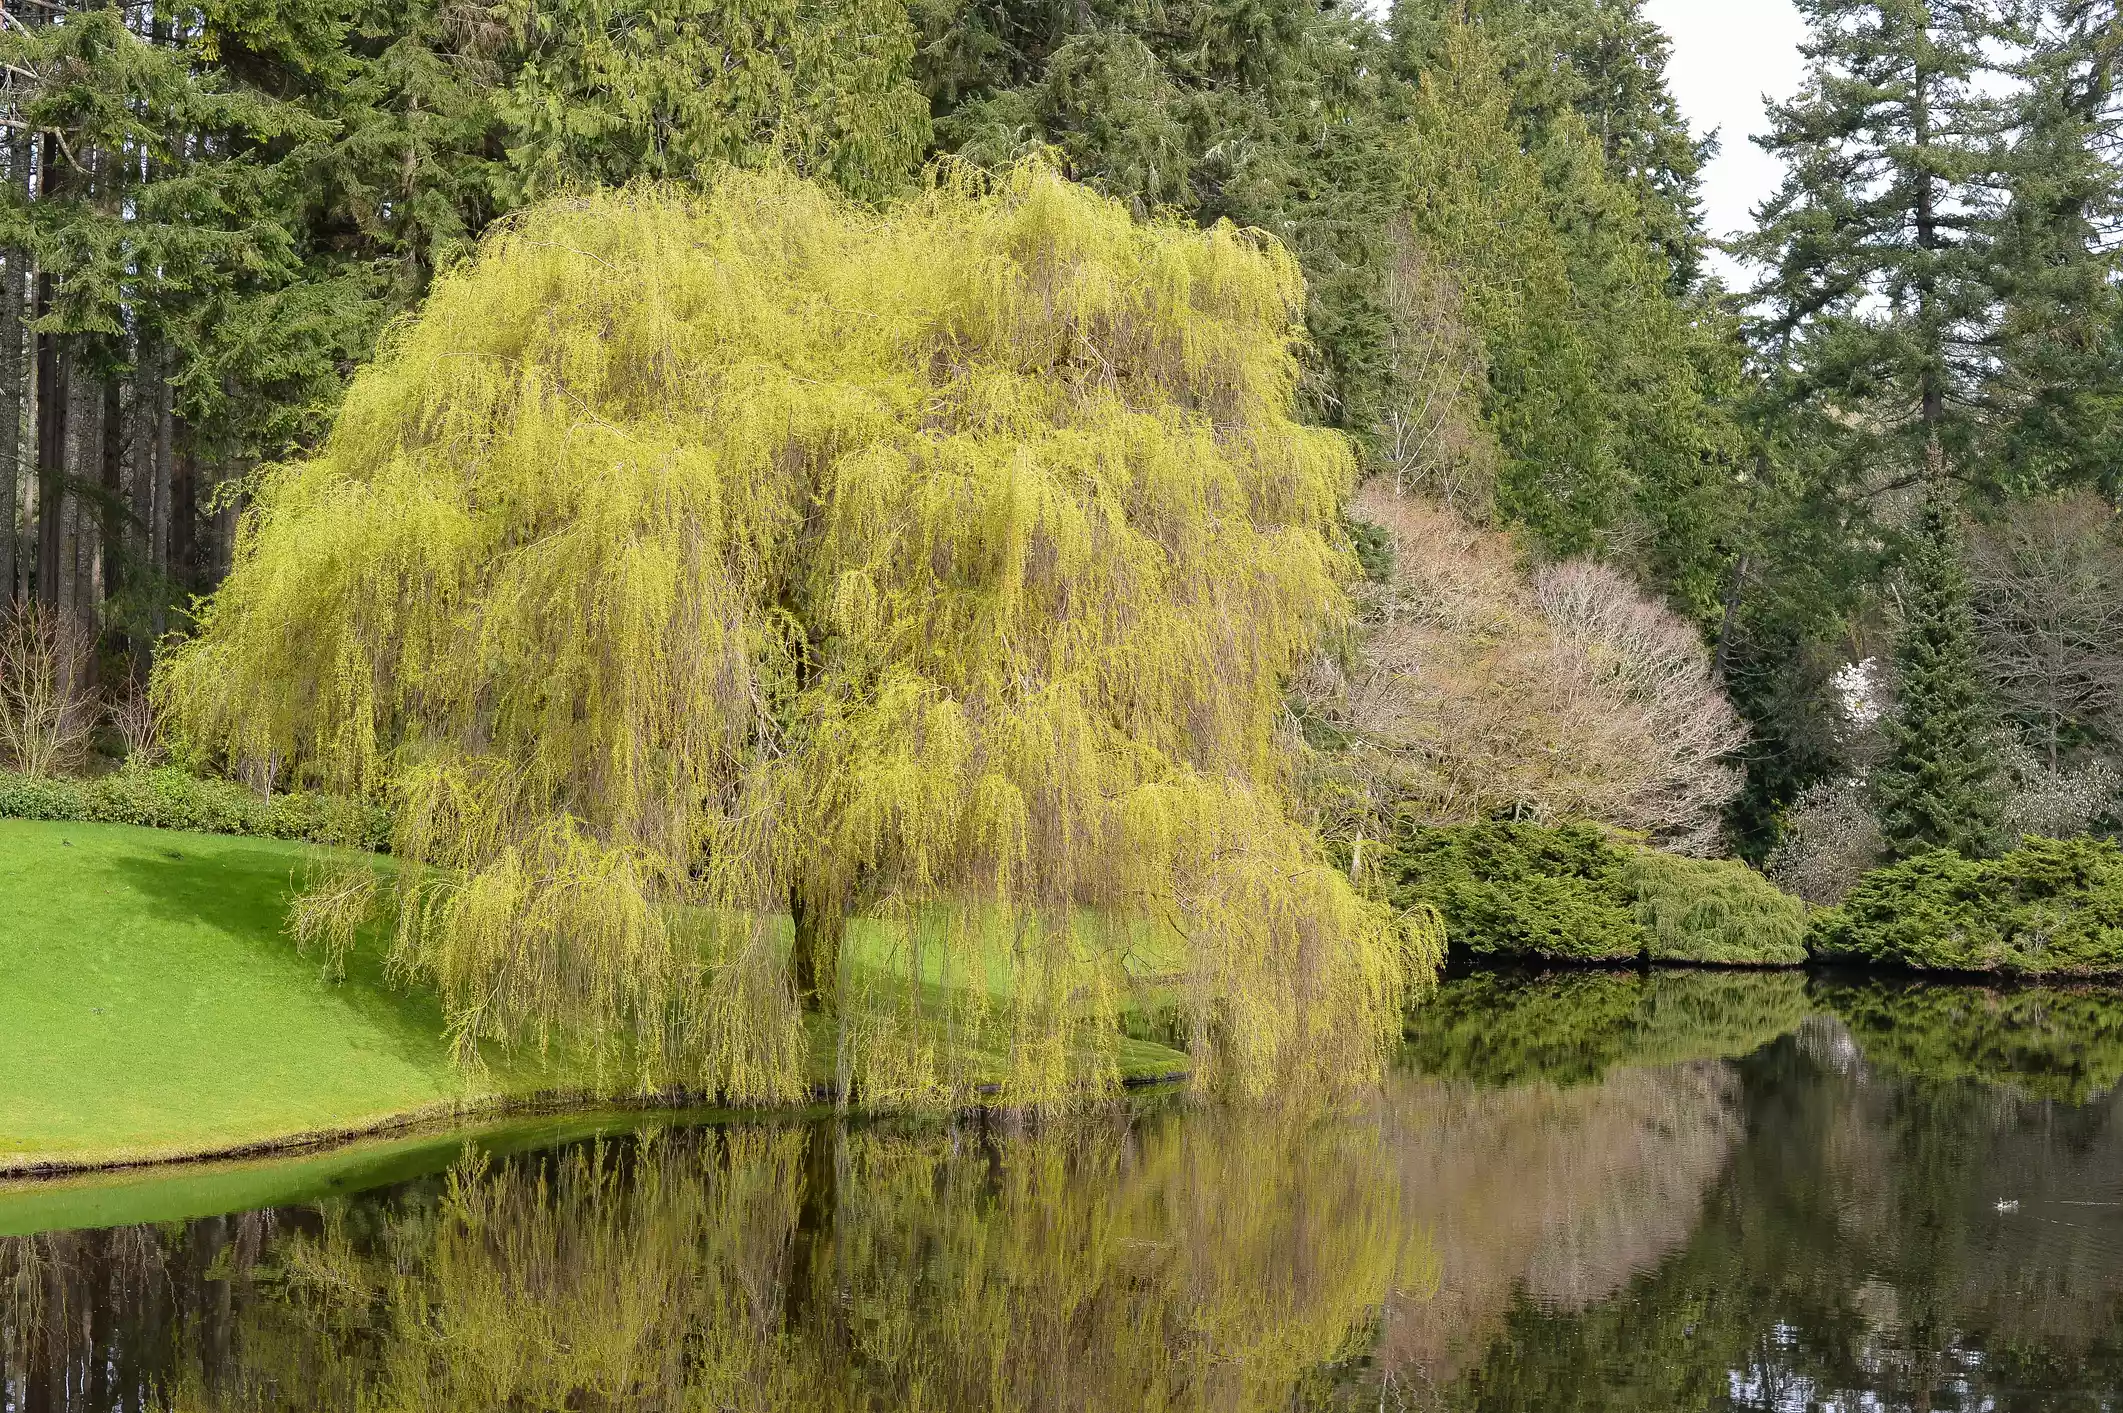 Weeping willow tree next to a lake